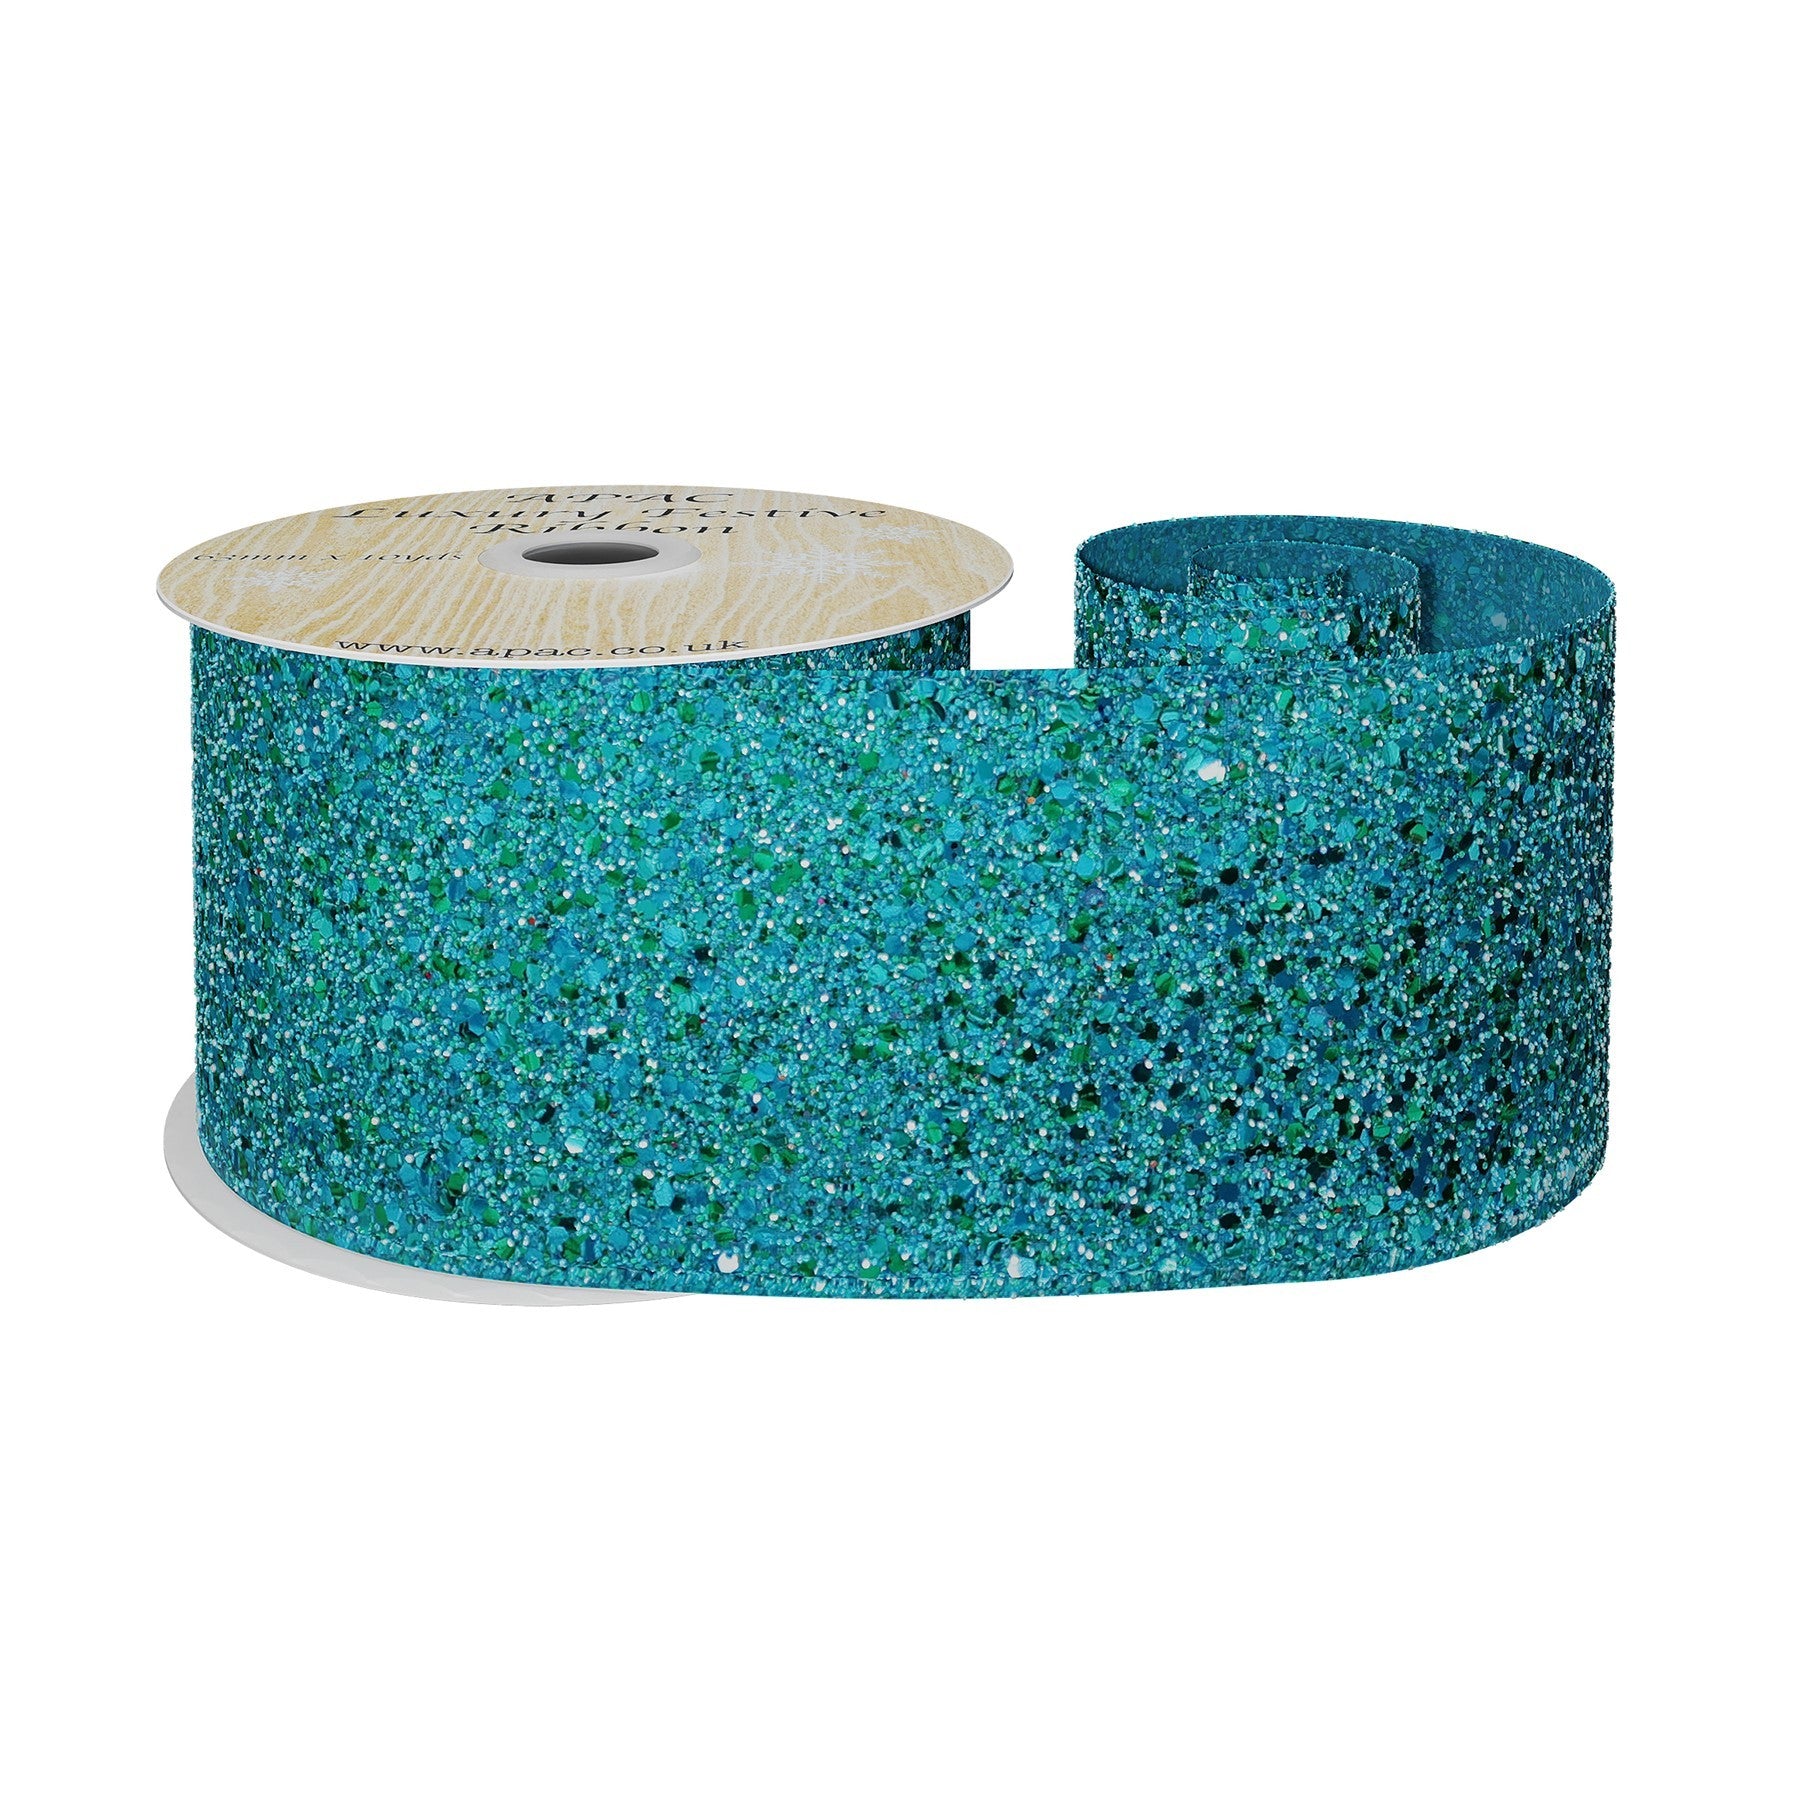 View Peacock Blue Glitter Wired Ribbon 63mm x 10 yards information